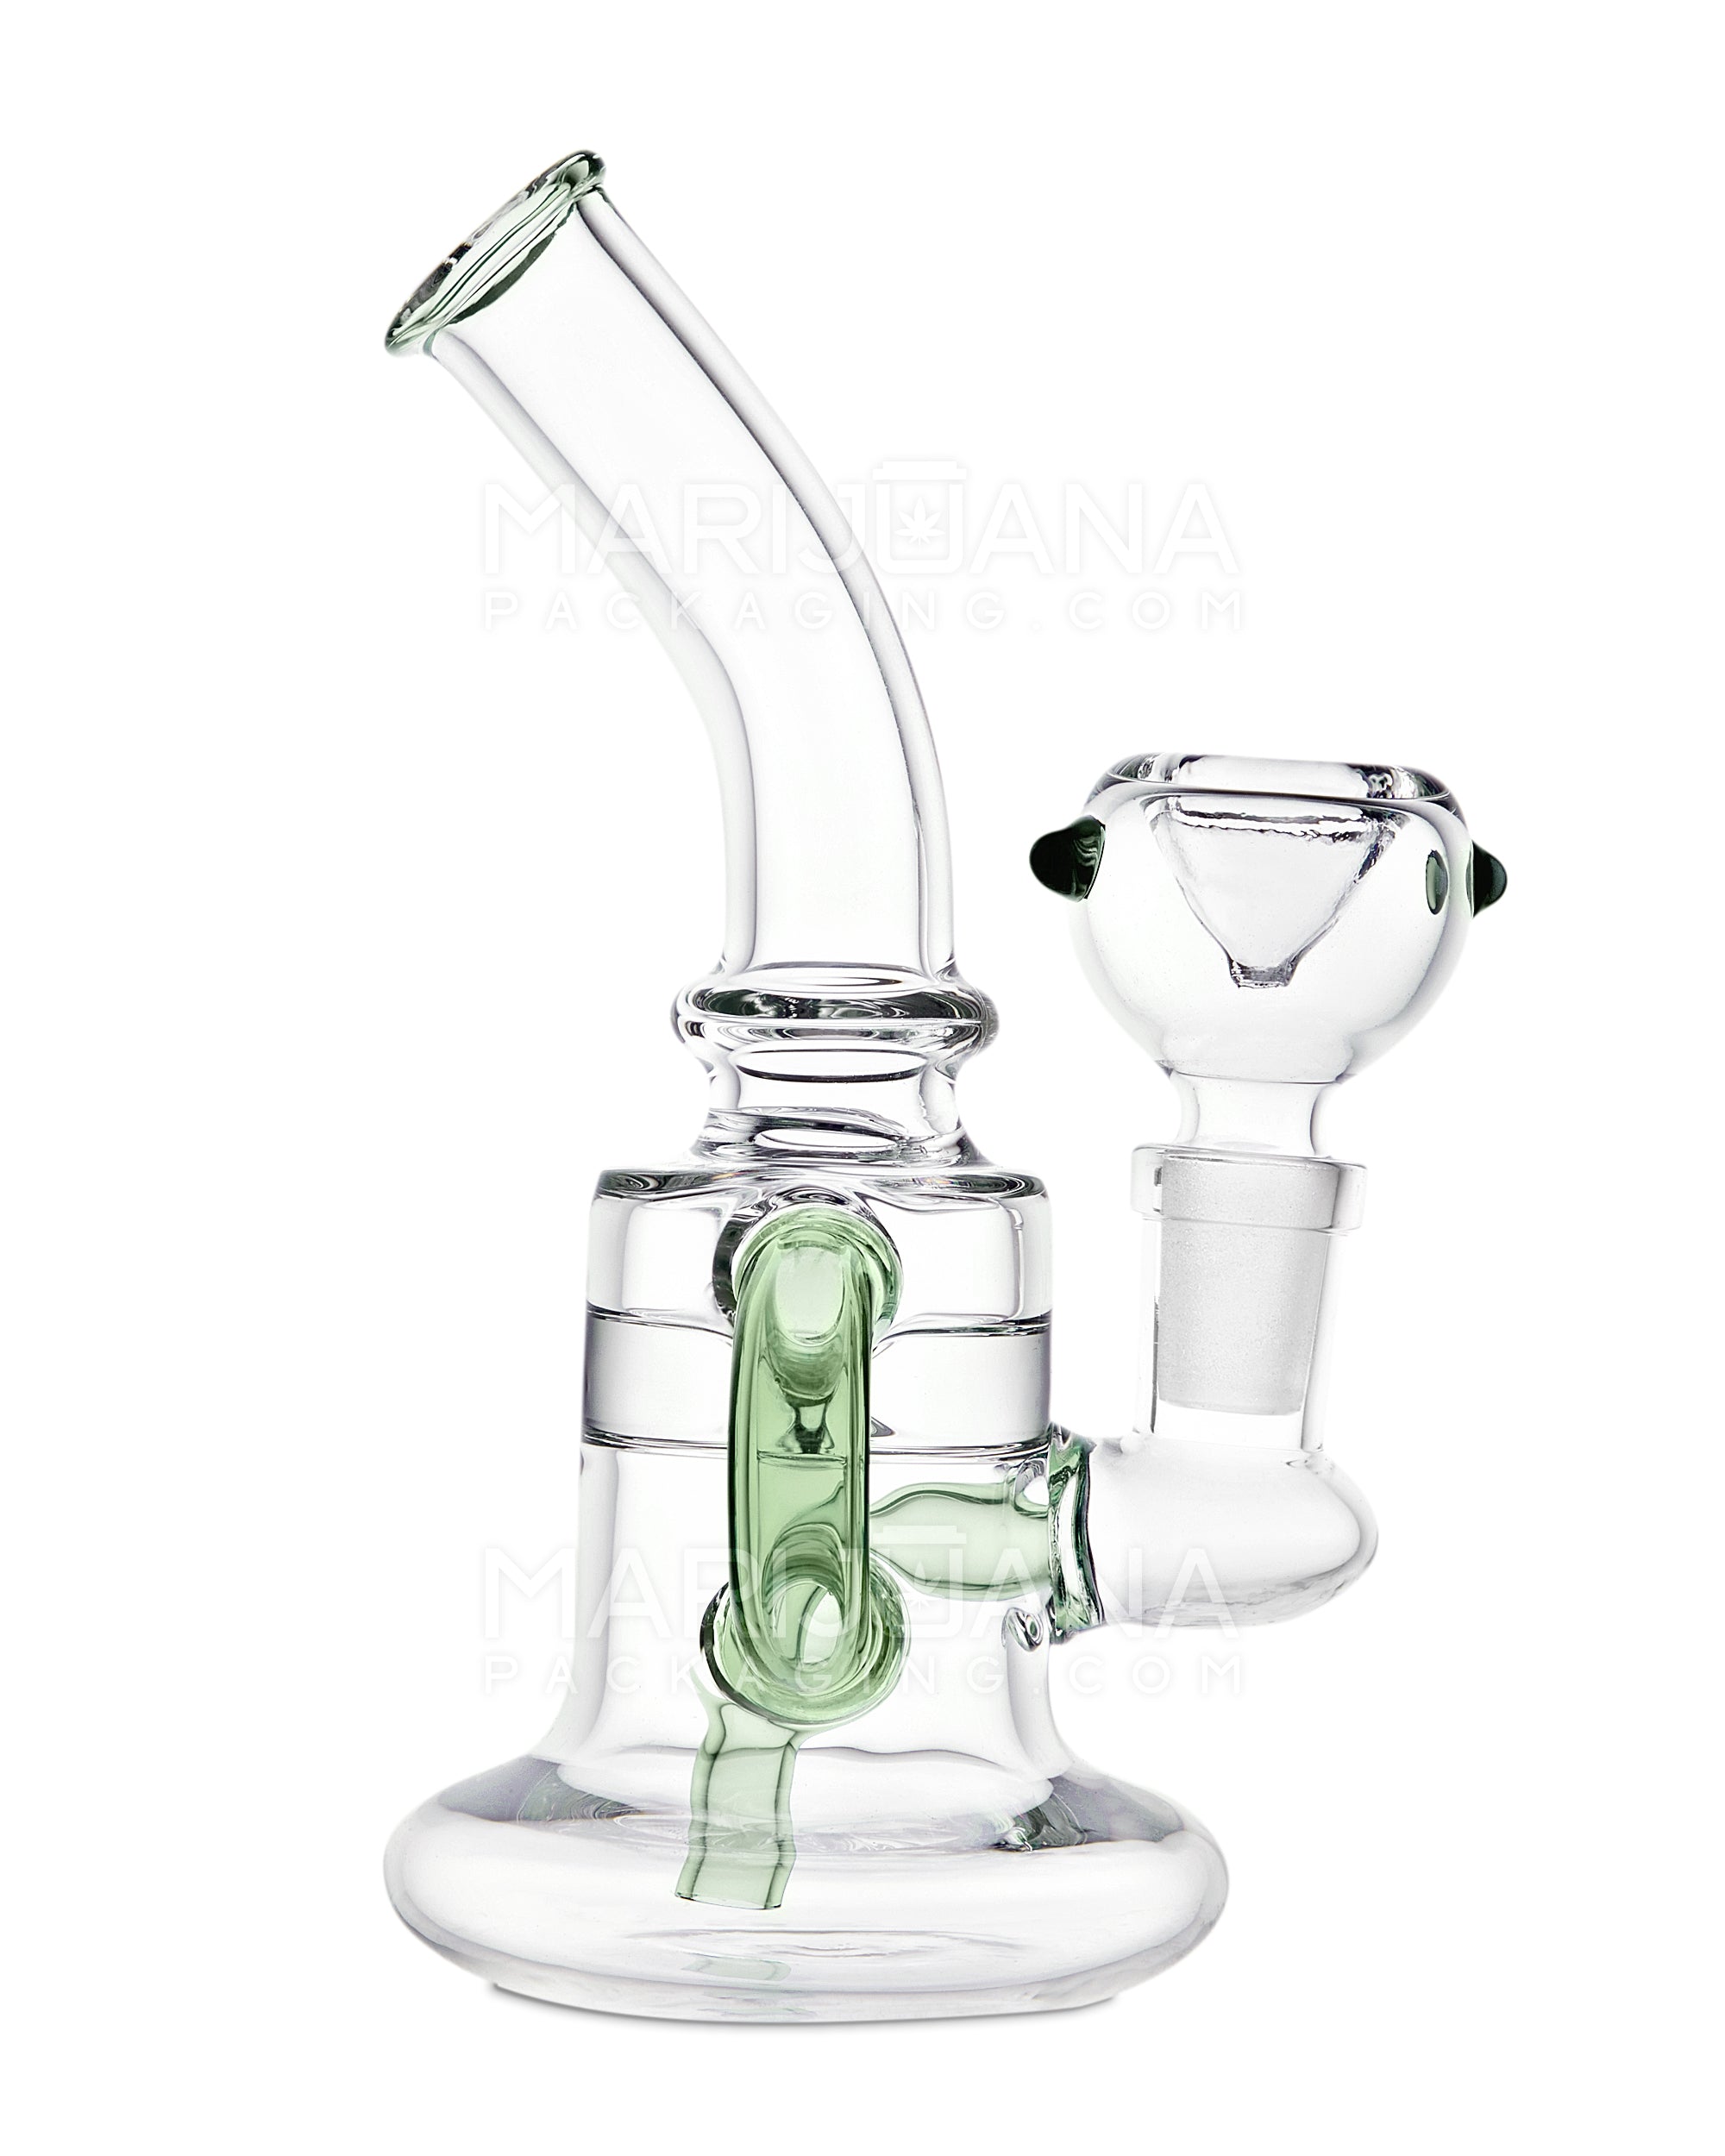 Bent Neck Single Uptake Recycler Water Pipe w/ Honeycomb Bowl | 5.5in Tall - 14mm Bowl - Green